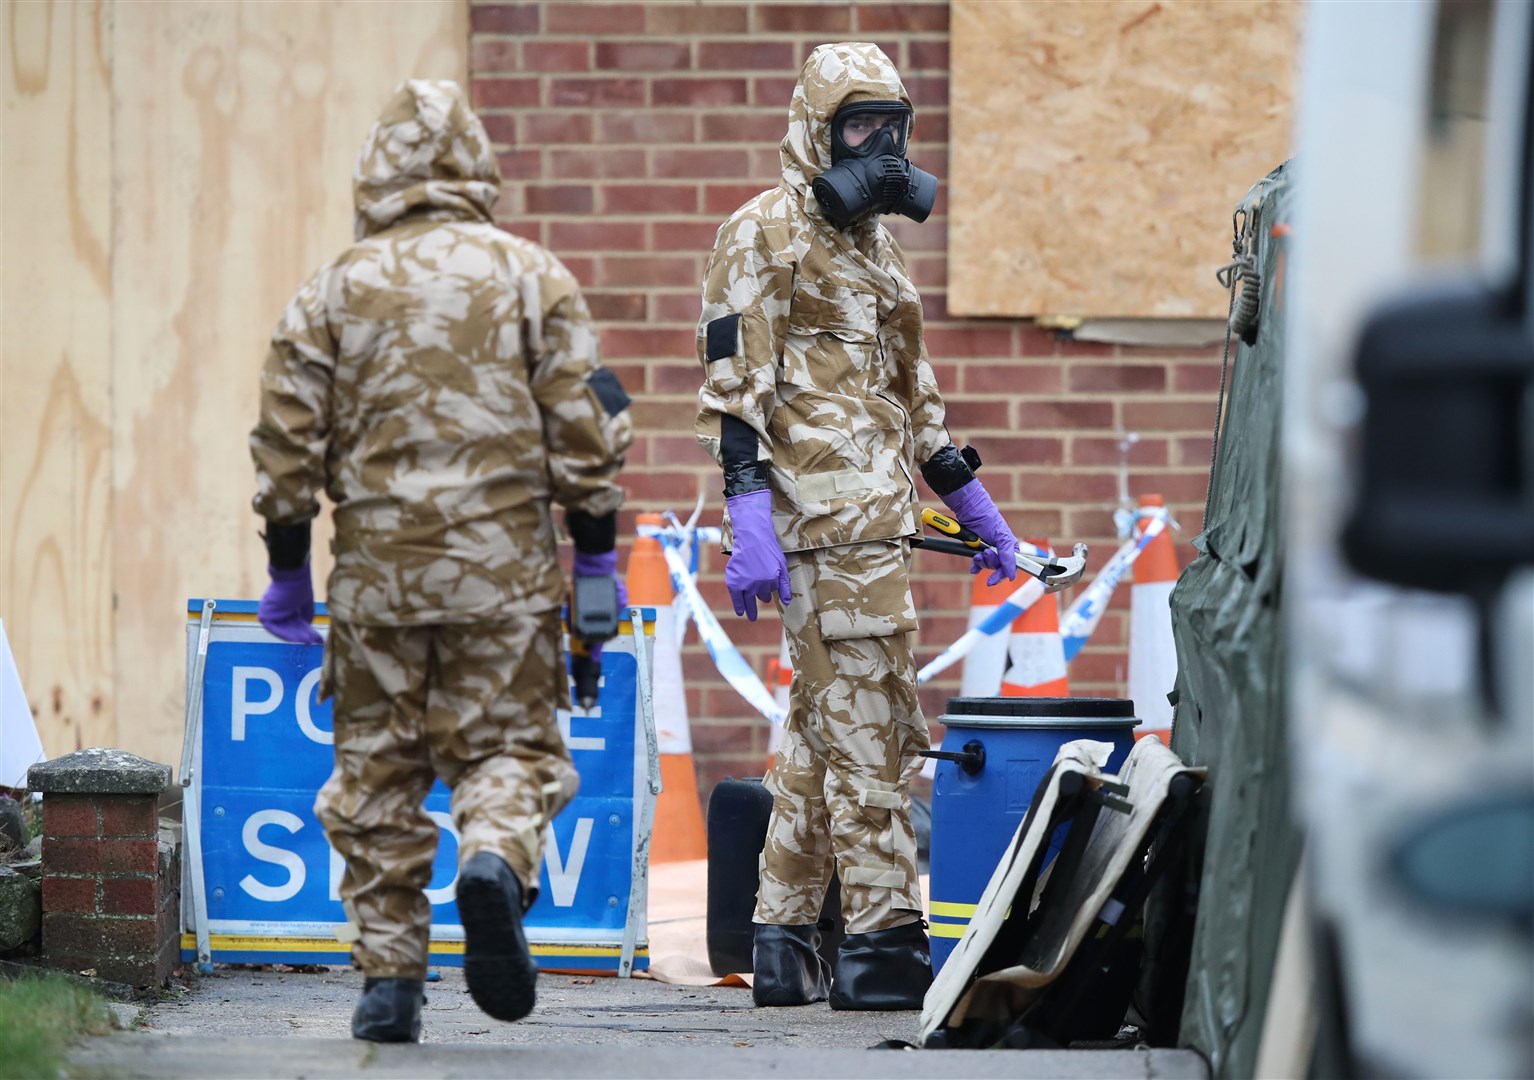 Members of the military wore protective clothing as work took place at the home of former Russian spy Sergei Skripal (Andrew Matthews/PA)